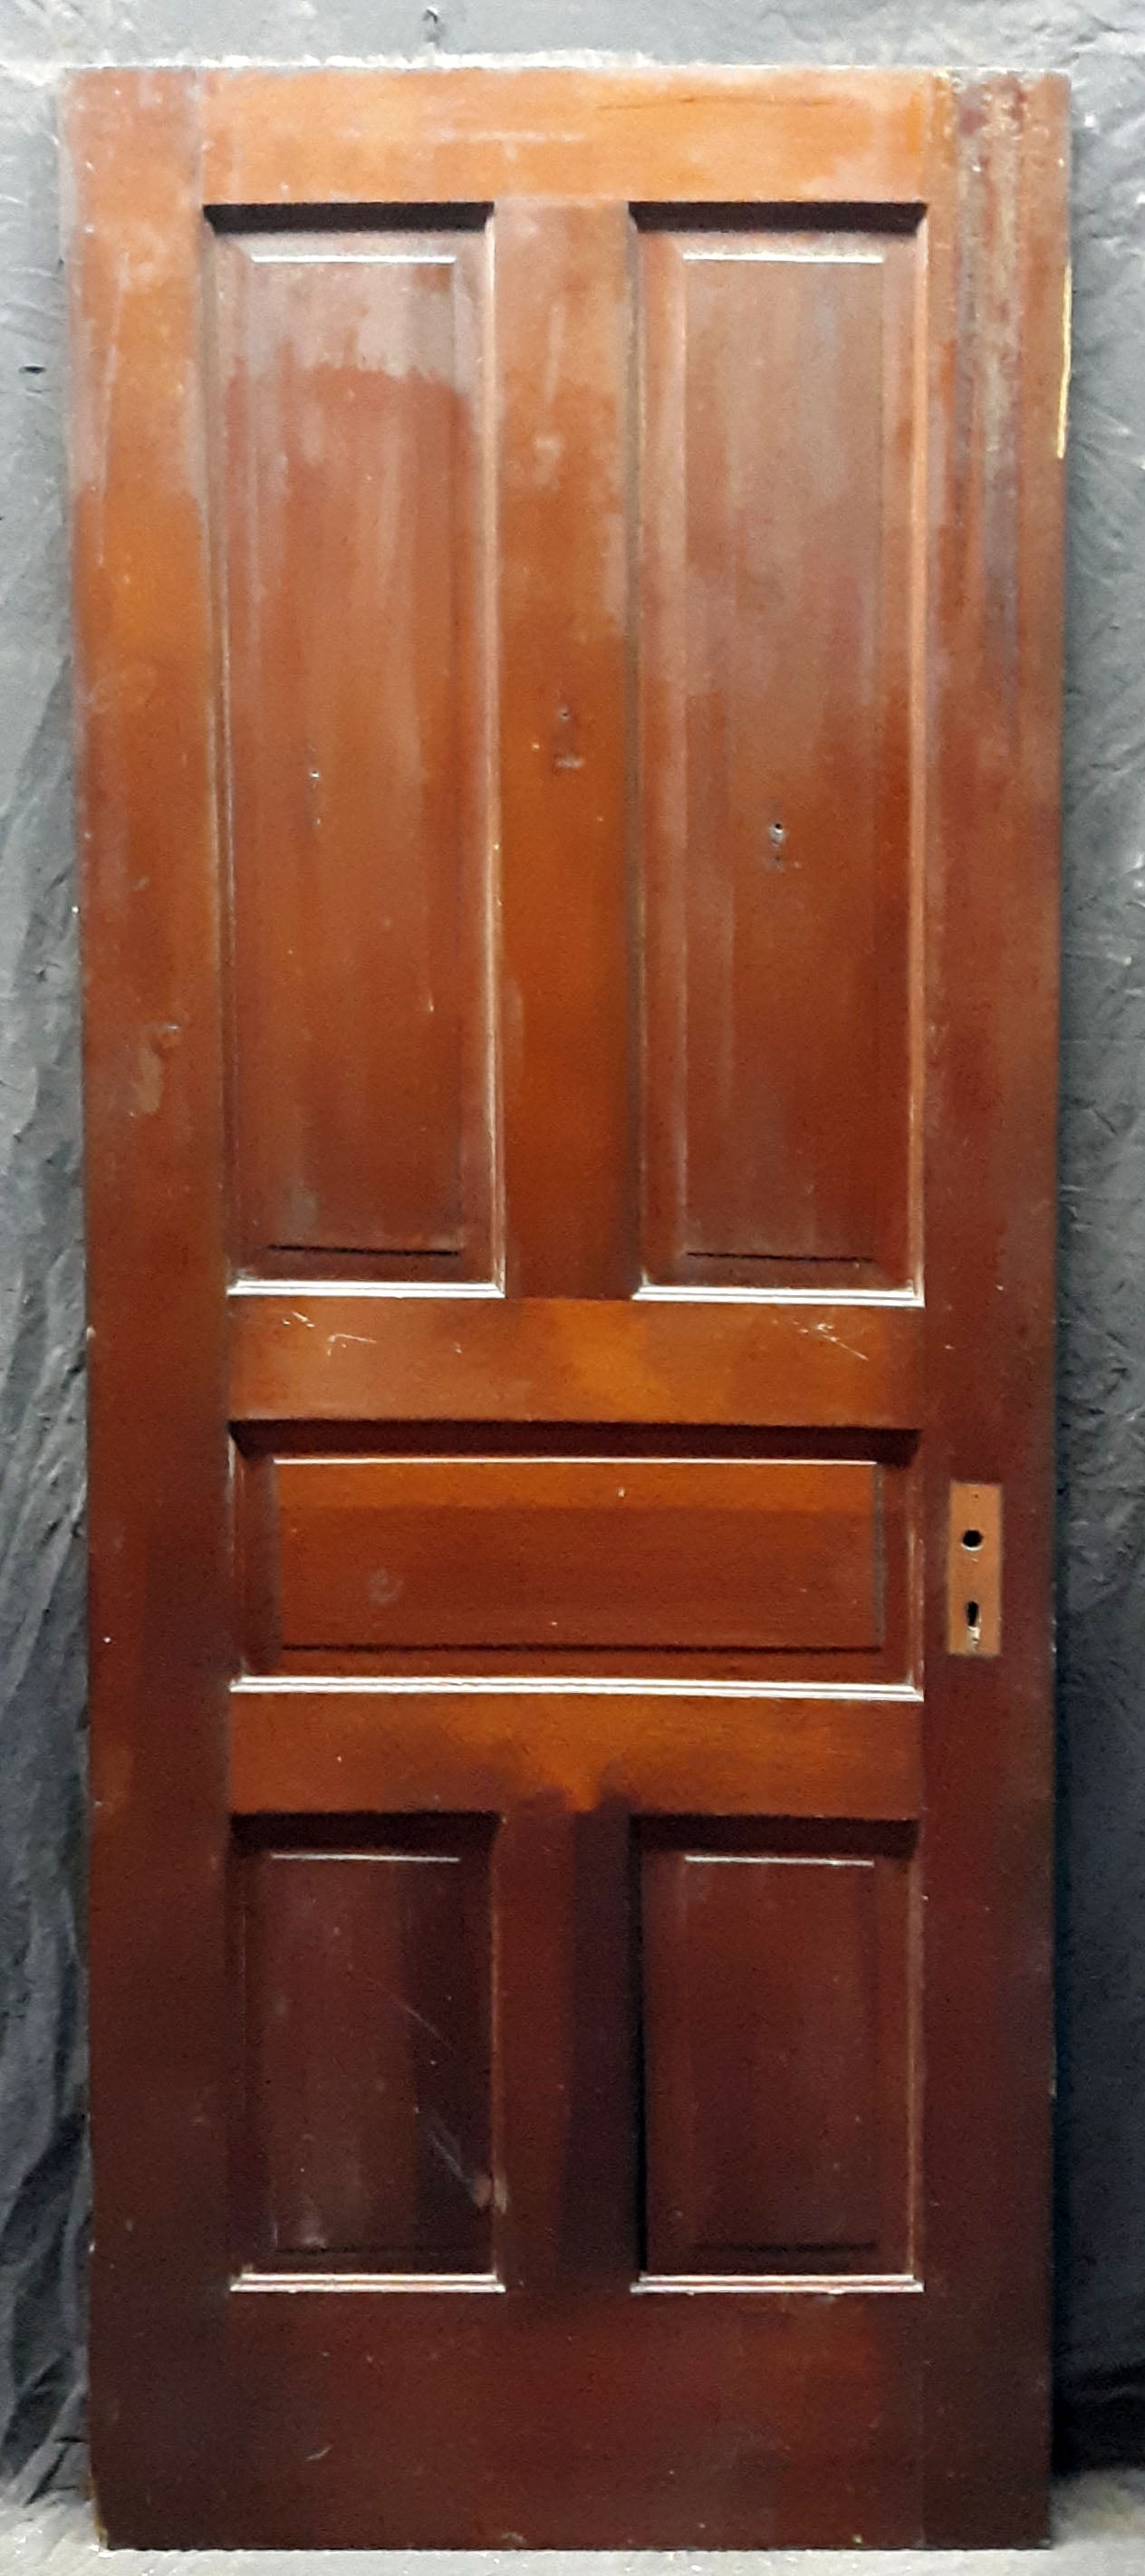 2 available 30"x77" Antique Vintage Old Reclaimed Salvaged SOLID Wood Wooden Interior Doors 5 Panels